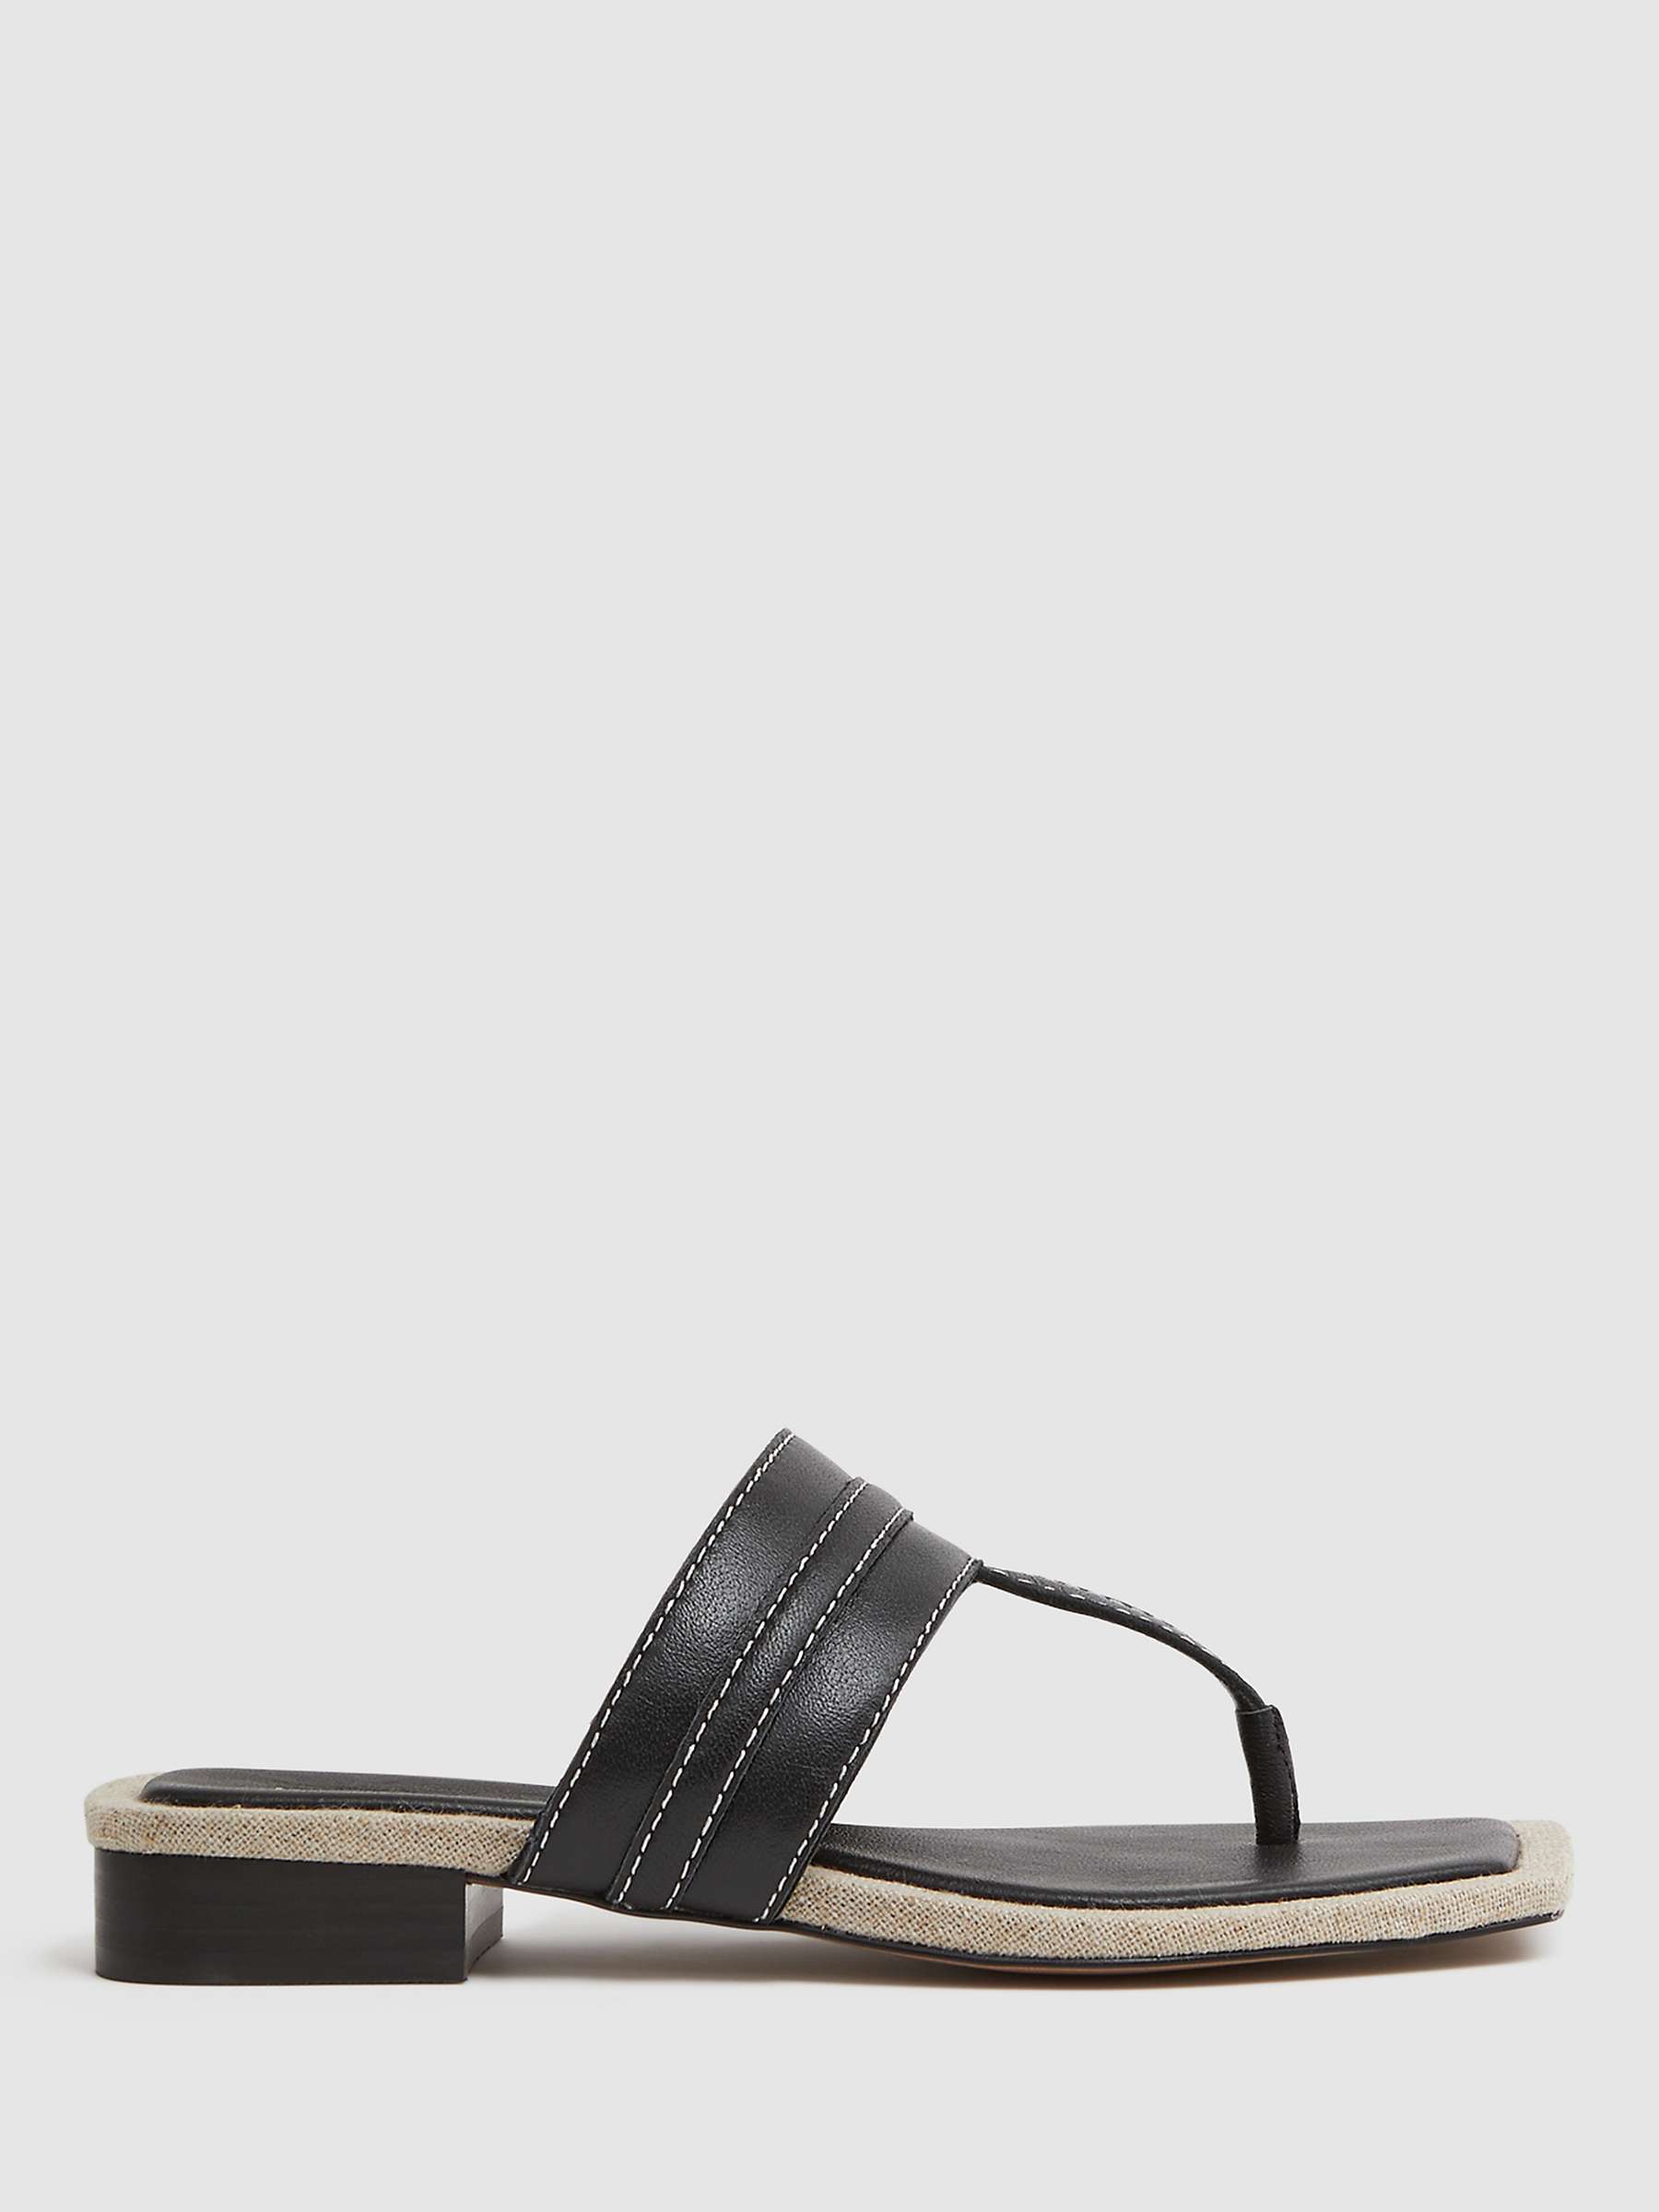 Buy Reiss Quinn Leather Thong Sandals Online at johnlewis.com